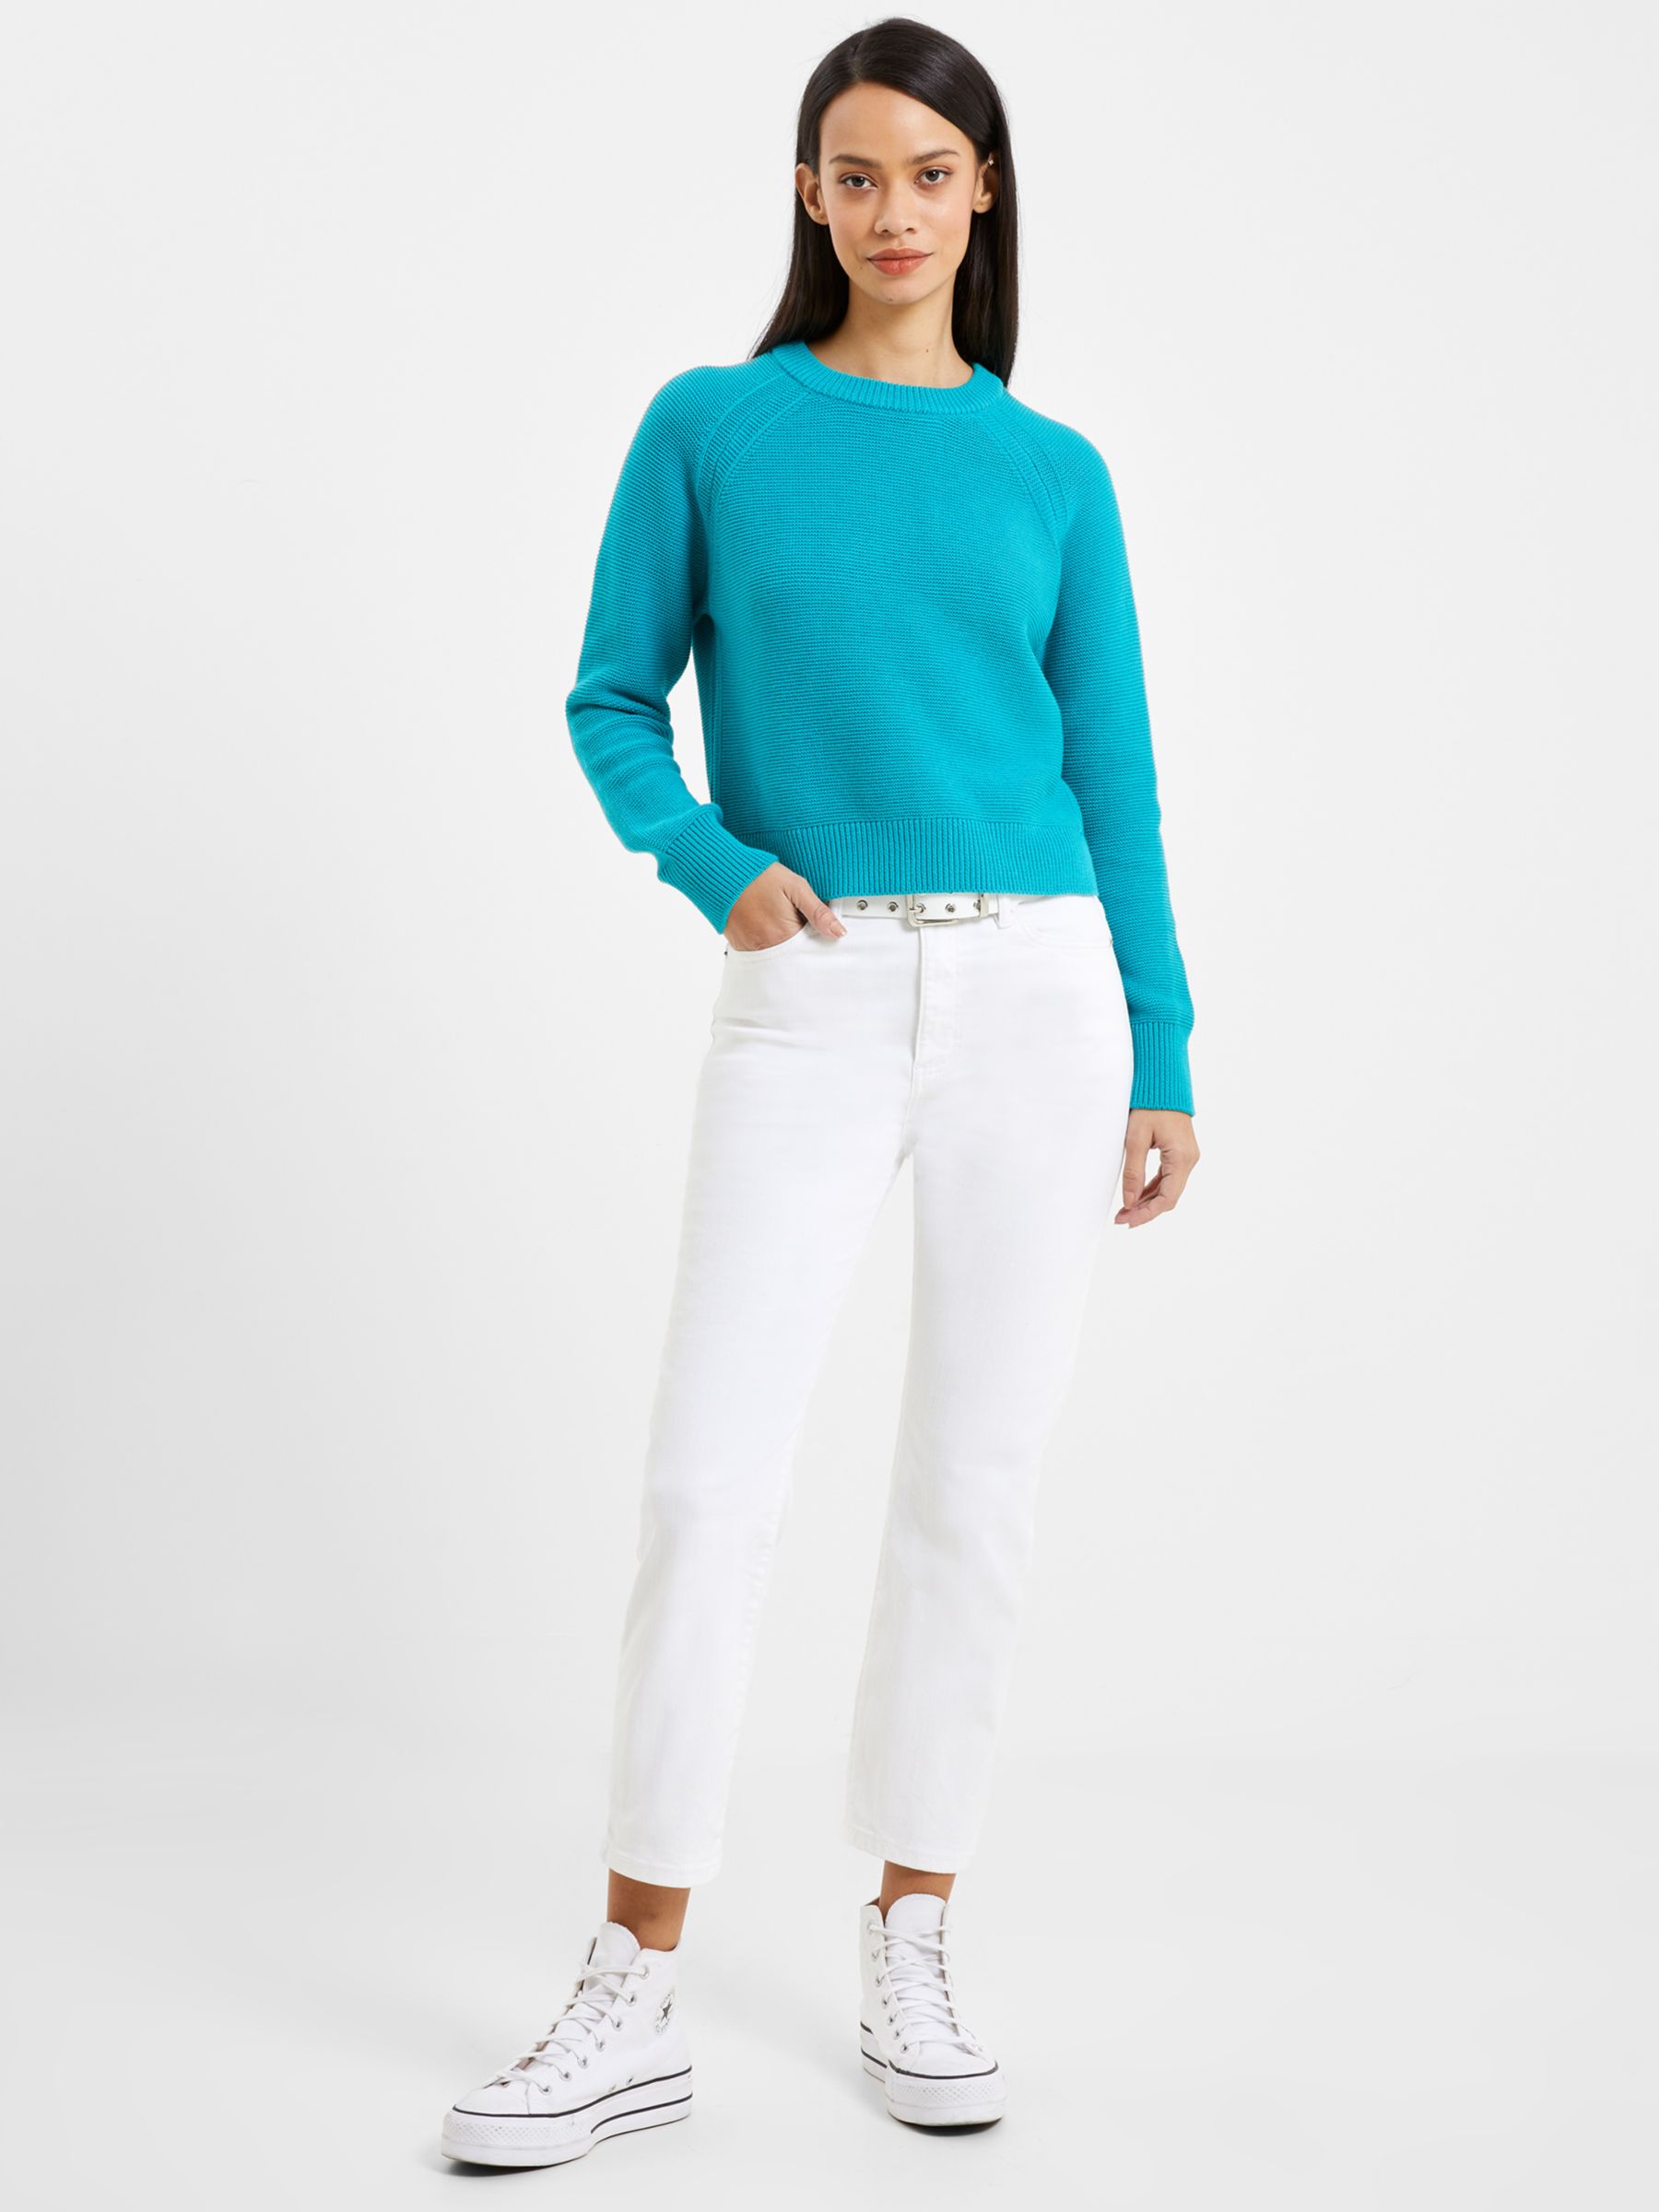 French Connection Lilly Crew Jumper